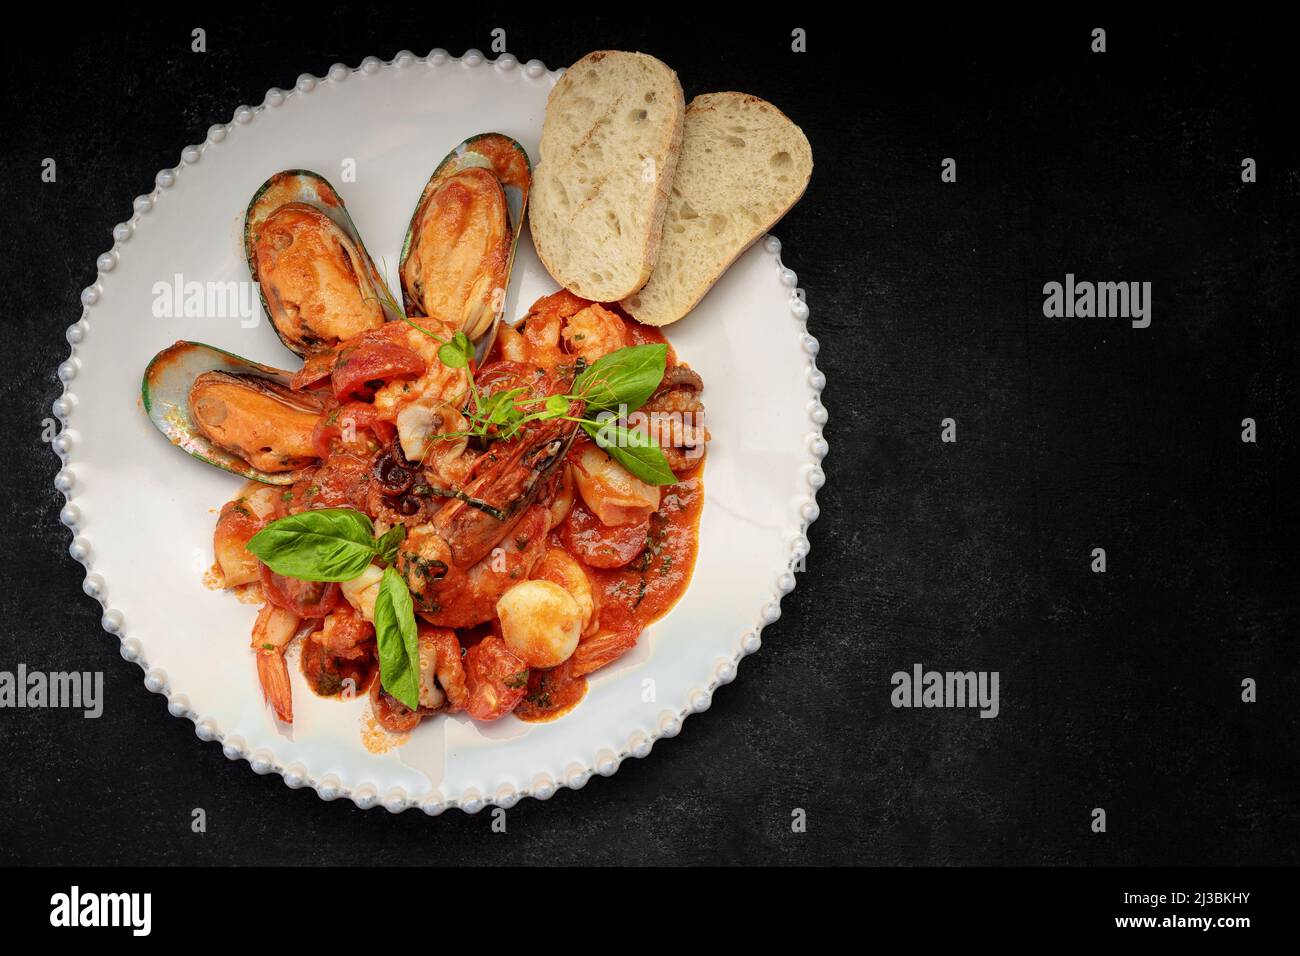 Sauteed seafood with shrimps, mussels, squid and scallop on a white plate, on a dark background Stock Photo